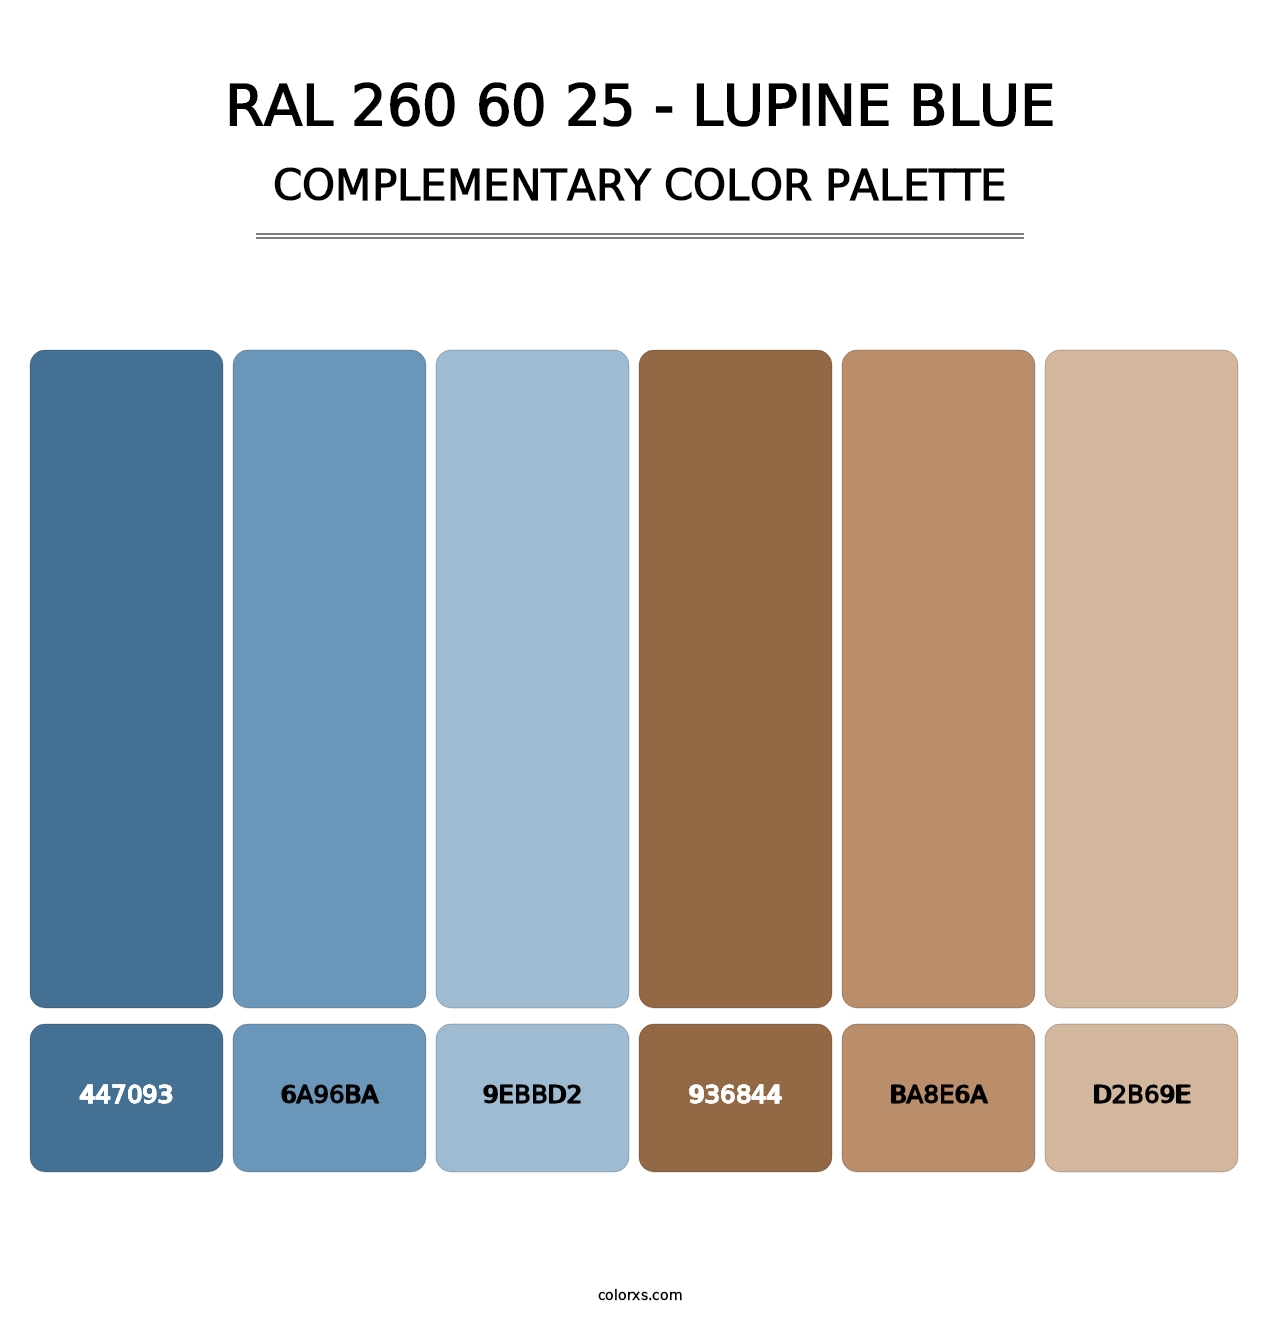 RAL 260 60 25 - Lupine Blue - Complementary Color Palette